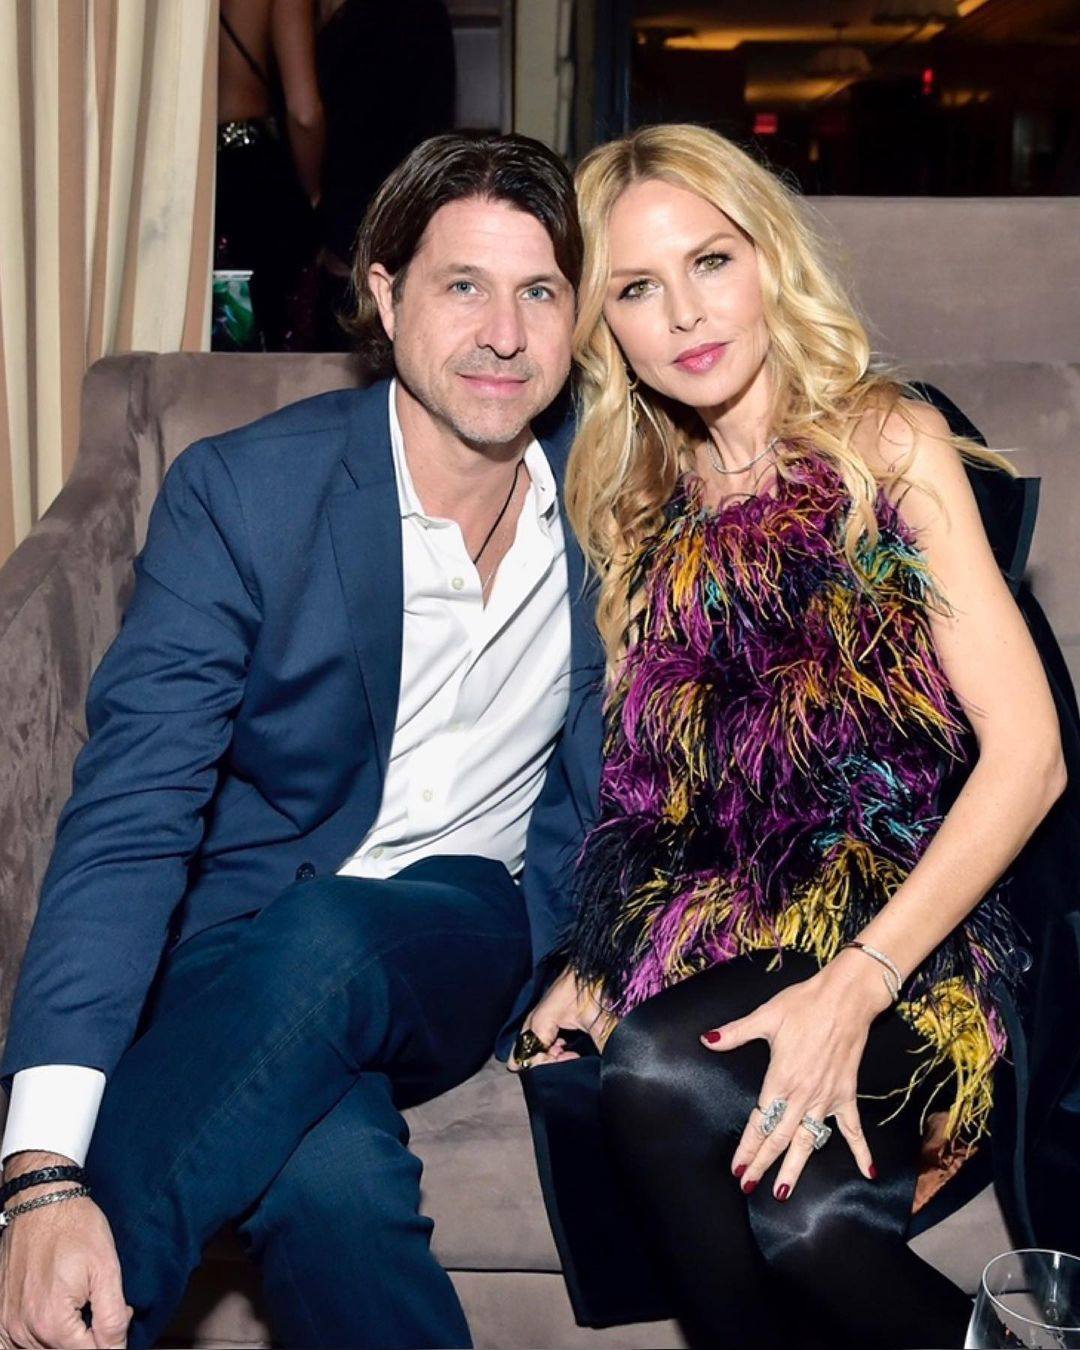 Celeb stylist and businesswoman Rachel Zoe and her husband Rodger Berman are partners in all aspects of life. Photo: @rbermanus/Instagram